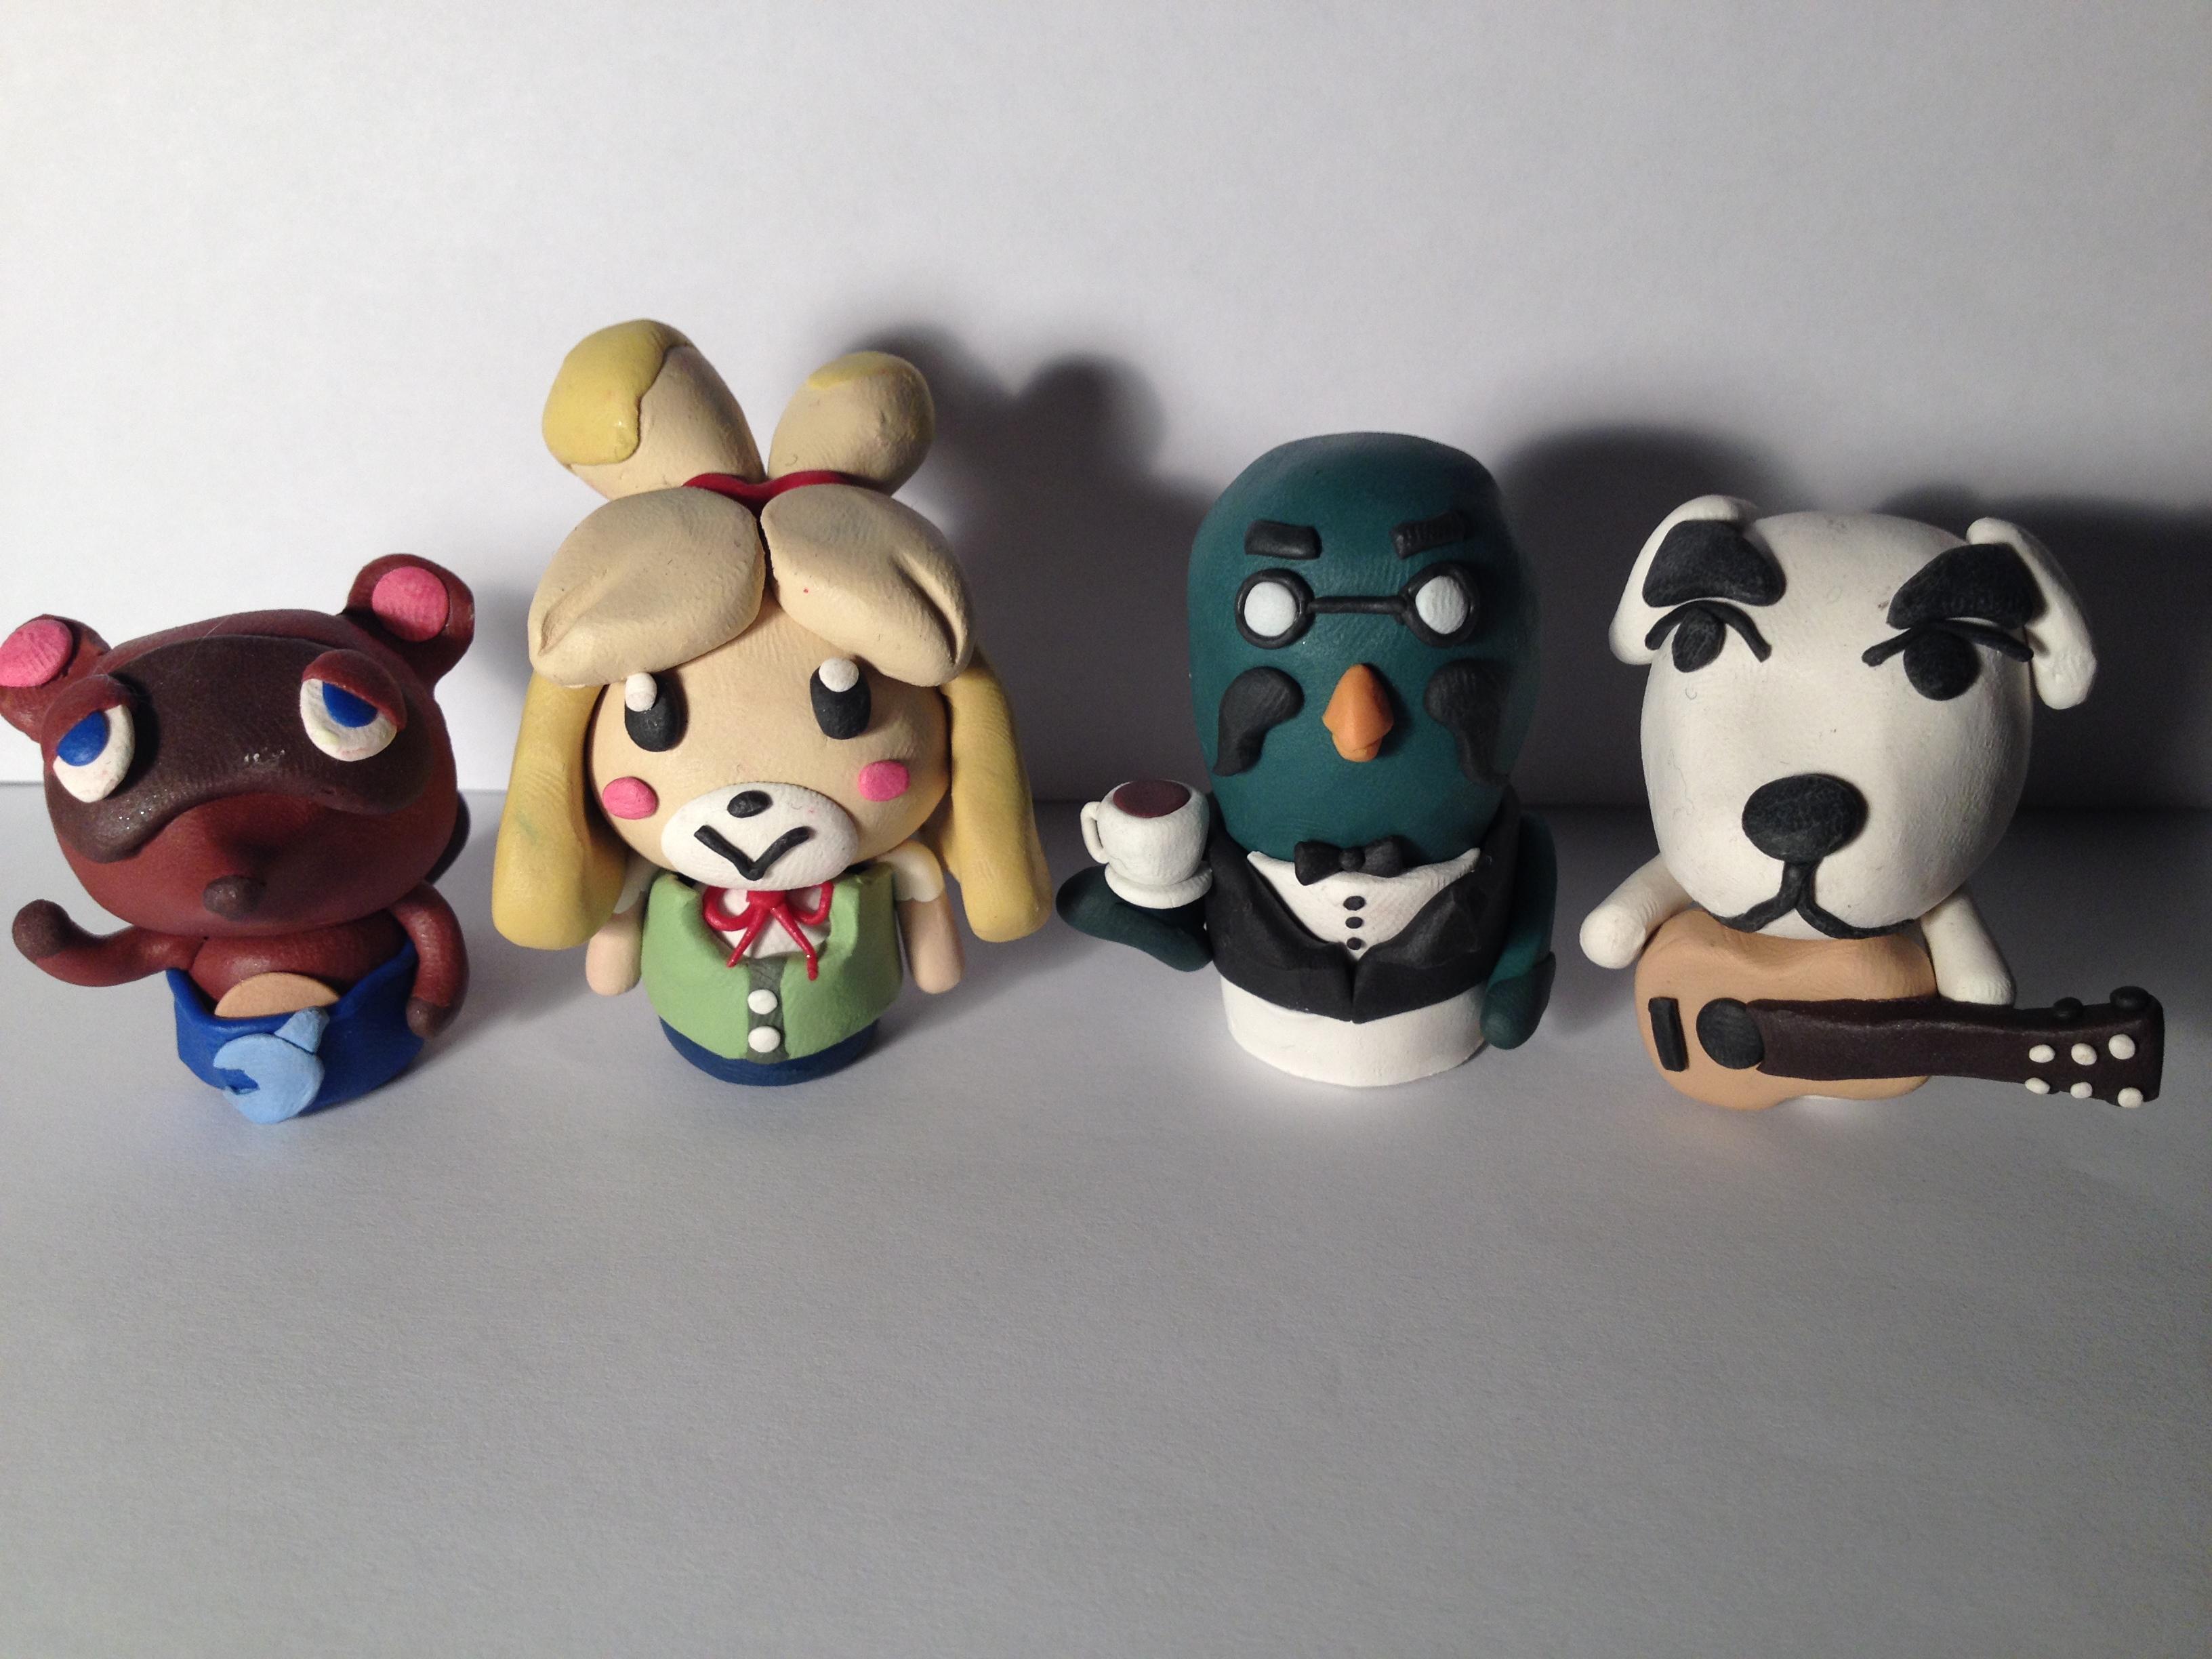 Animal Crossing figures made with clay.